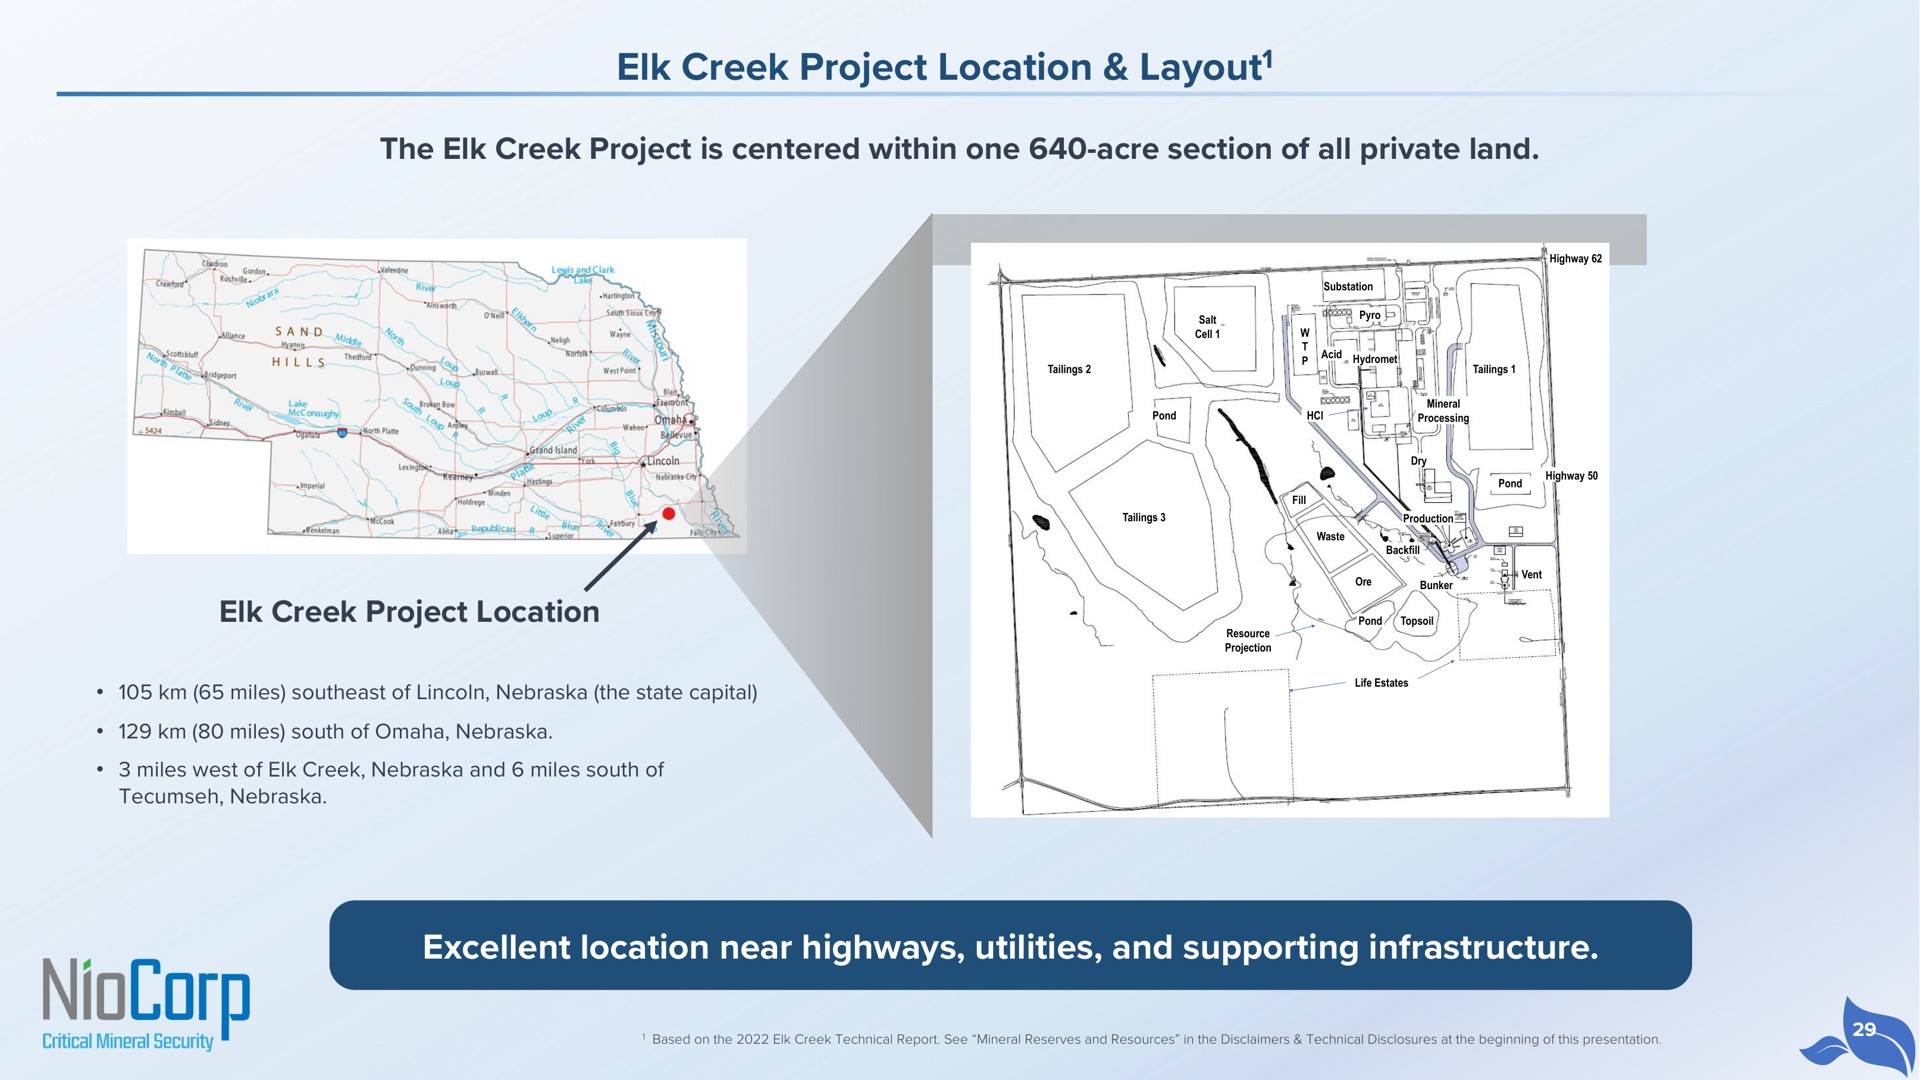 elk creek project location layout the elk creek project is centered within one acre section of all private land elk creek project location excellent location near highways utilities and supporting infrastructure layout a in | NioCorp